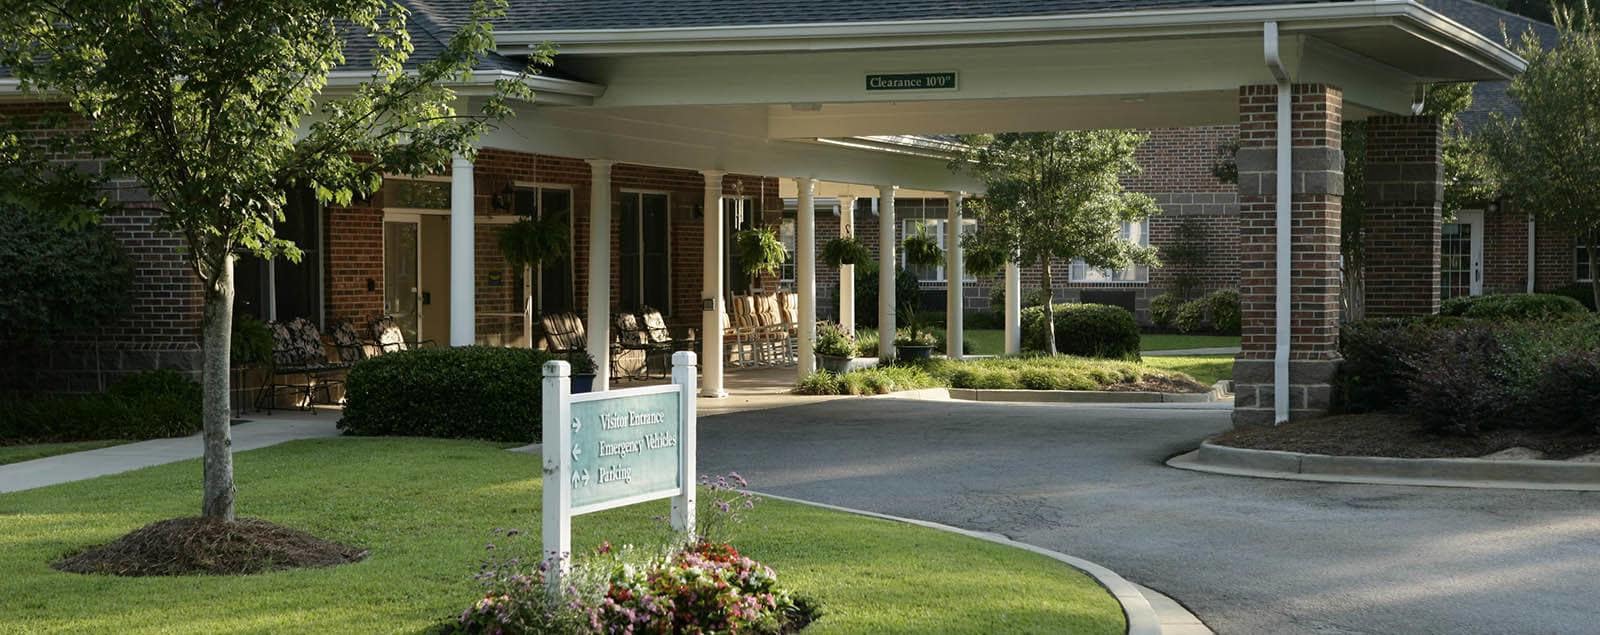 Schedule a senior living tour in Columbia